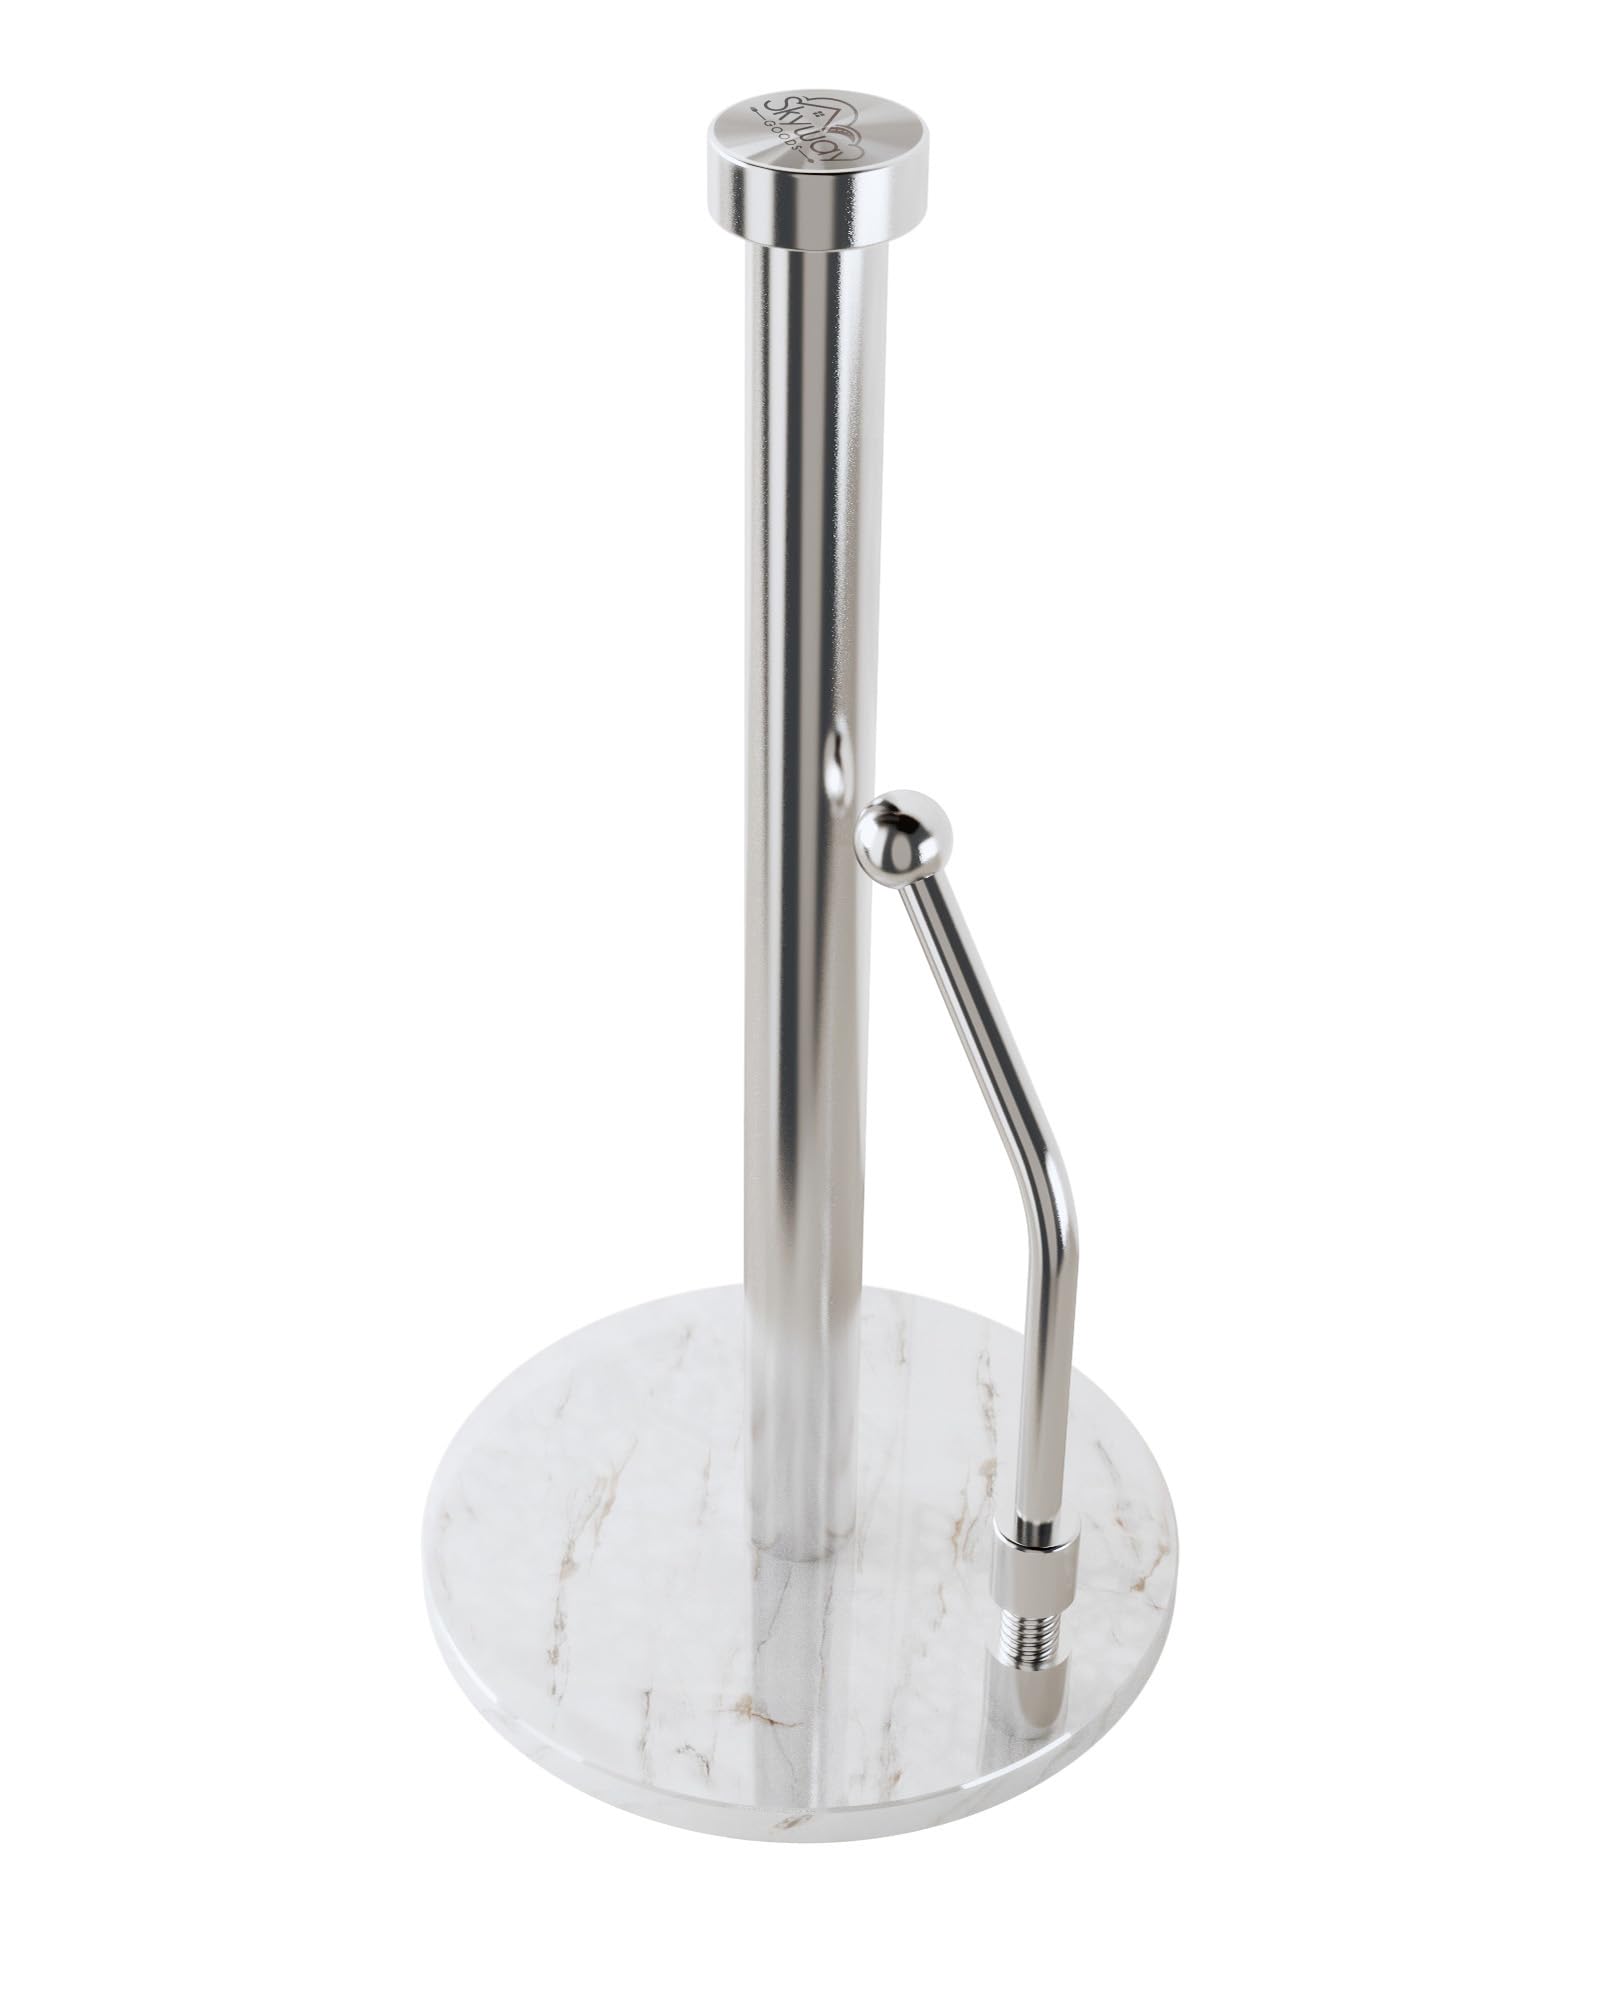 Skyway Goods - Stainless Steel Paper Towel Holder, Paper Towel Stand with Weighted Anti-Slip Base, Sleek Kitchen Countertop Paper Towel Holder, Space-Saving Paper Towel Holder, Light Marble Base